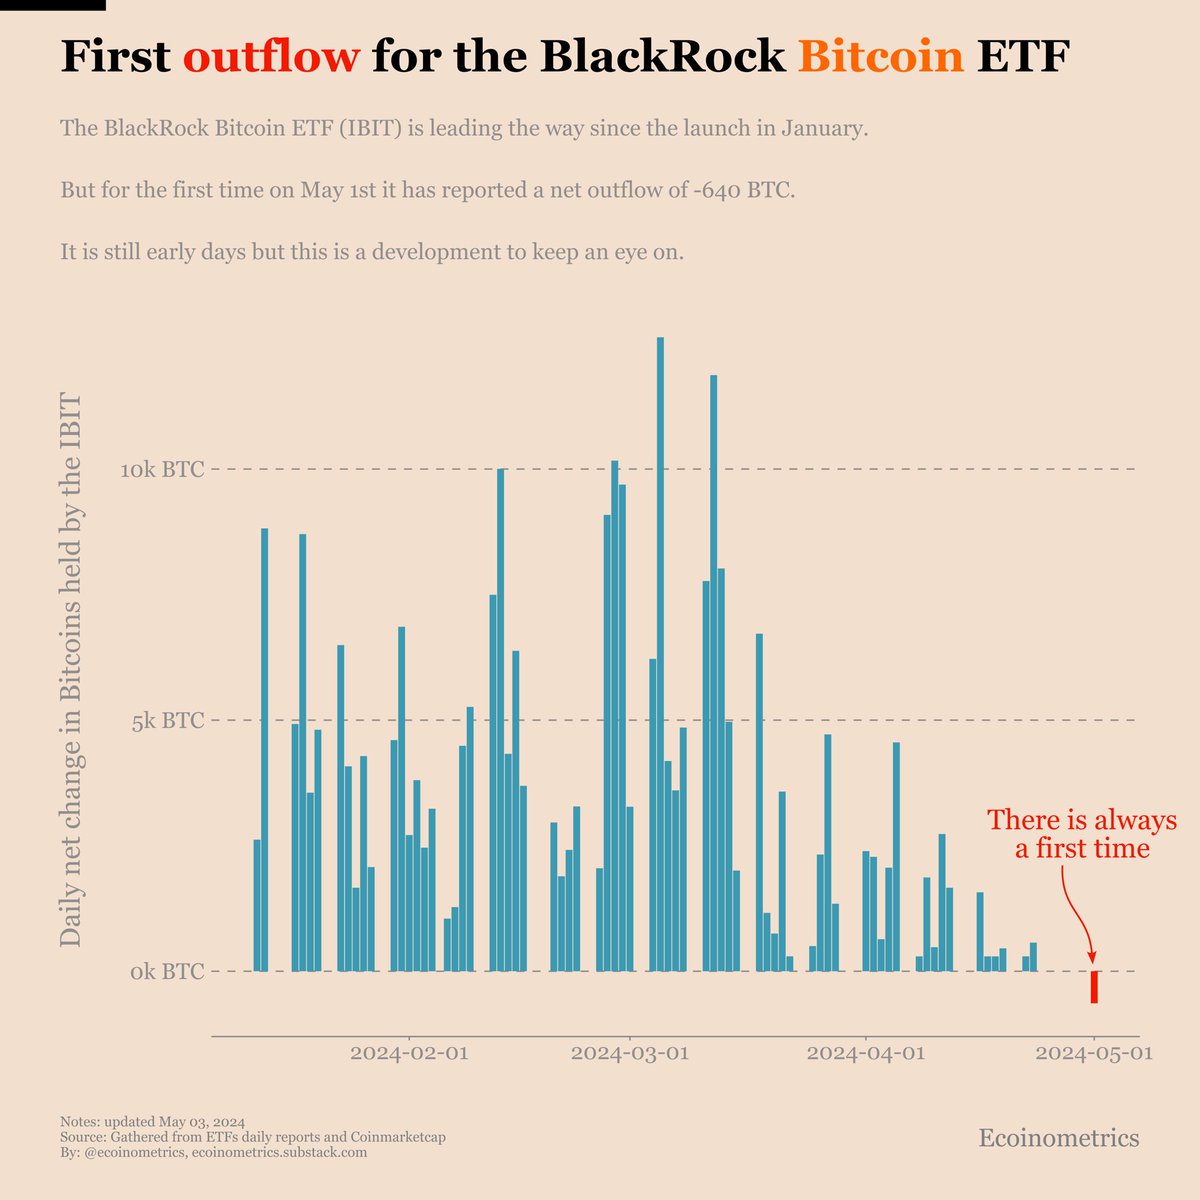 BlackRock’s #Bitcoin ETF experienced its first outflow ever